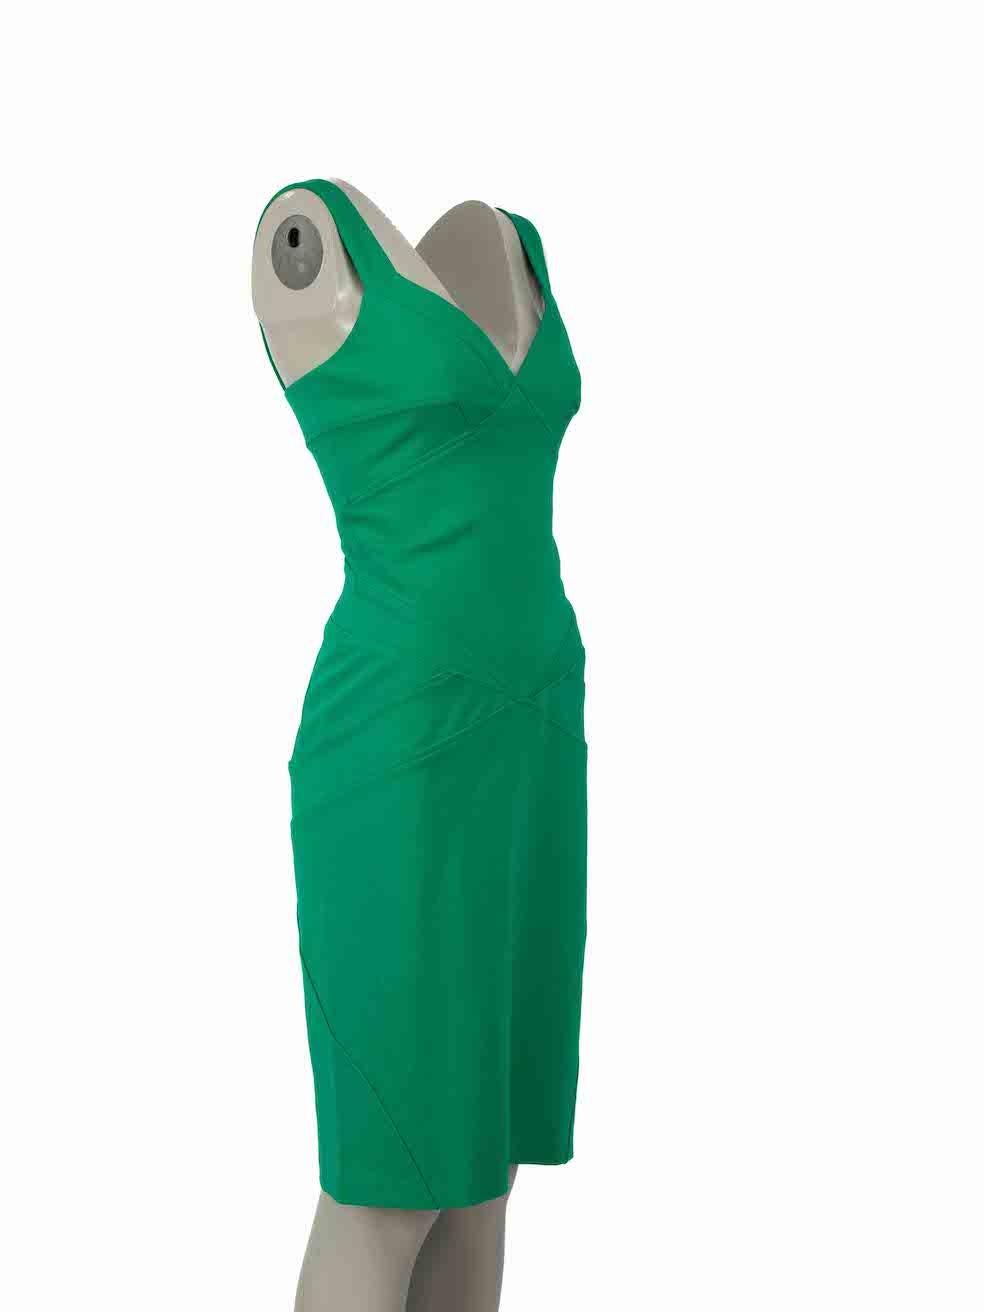 CONDITION is Very good. Minimal wear to dress is evident. Minimal wear to the front with faint mark and a pluck to the weave at the rear on this used Diane Von Furstenberg designer resale item.
 
Details
Benny model
Green
Viscose
Mini dress
Bodycon